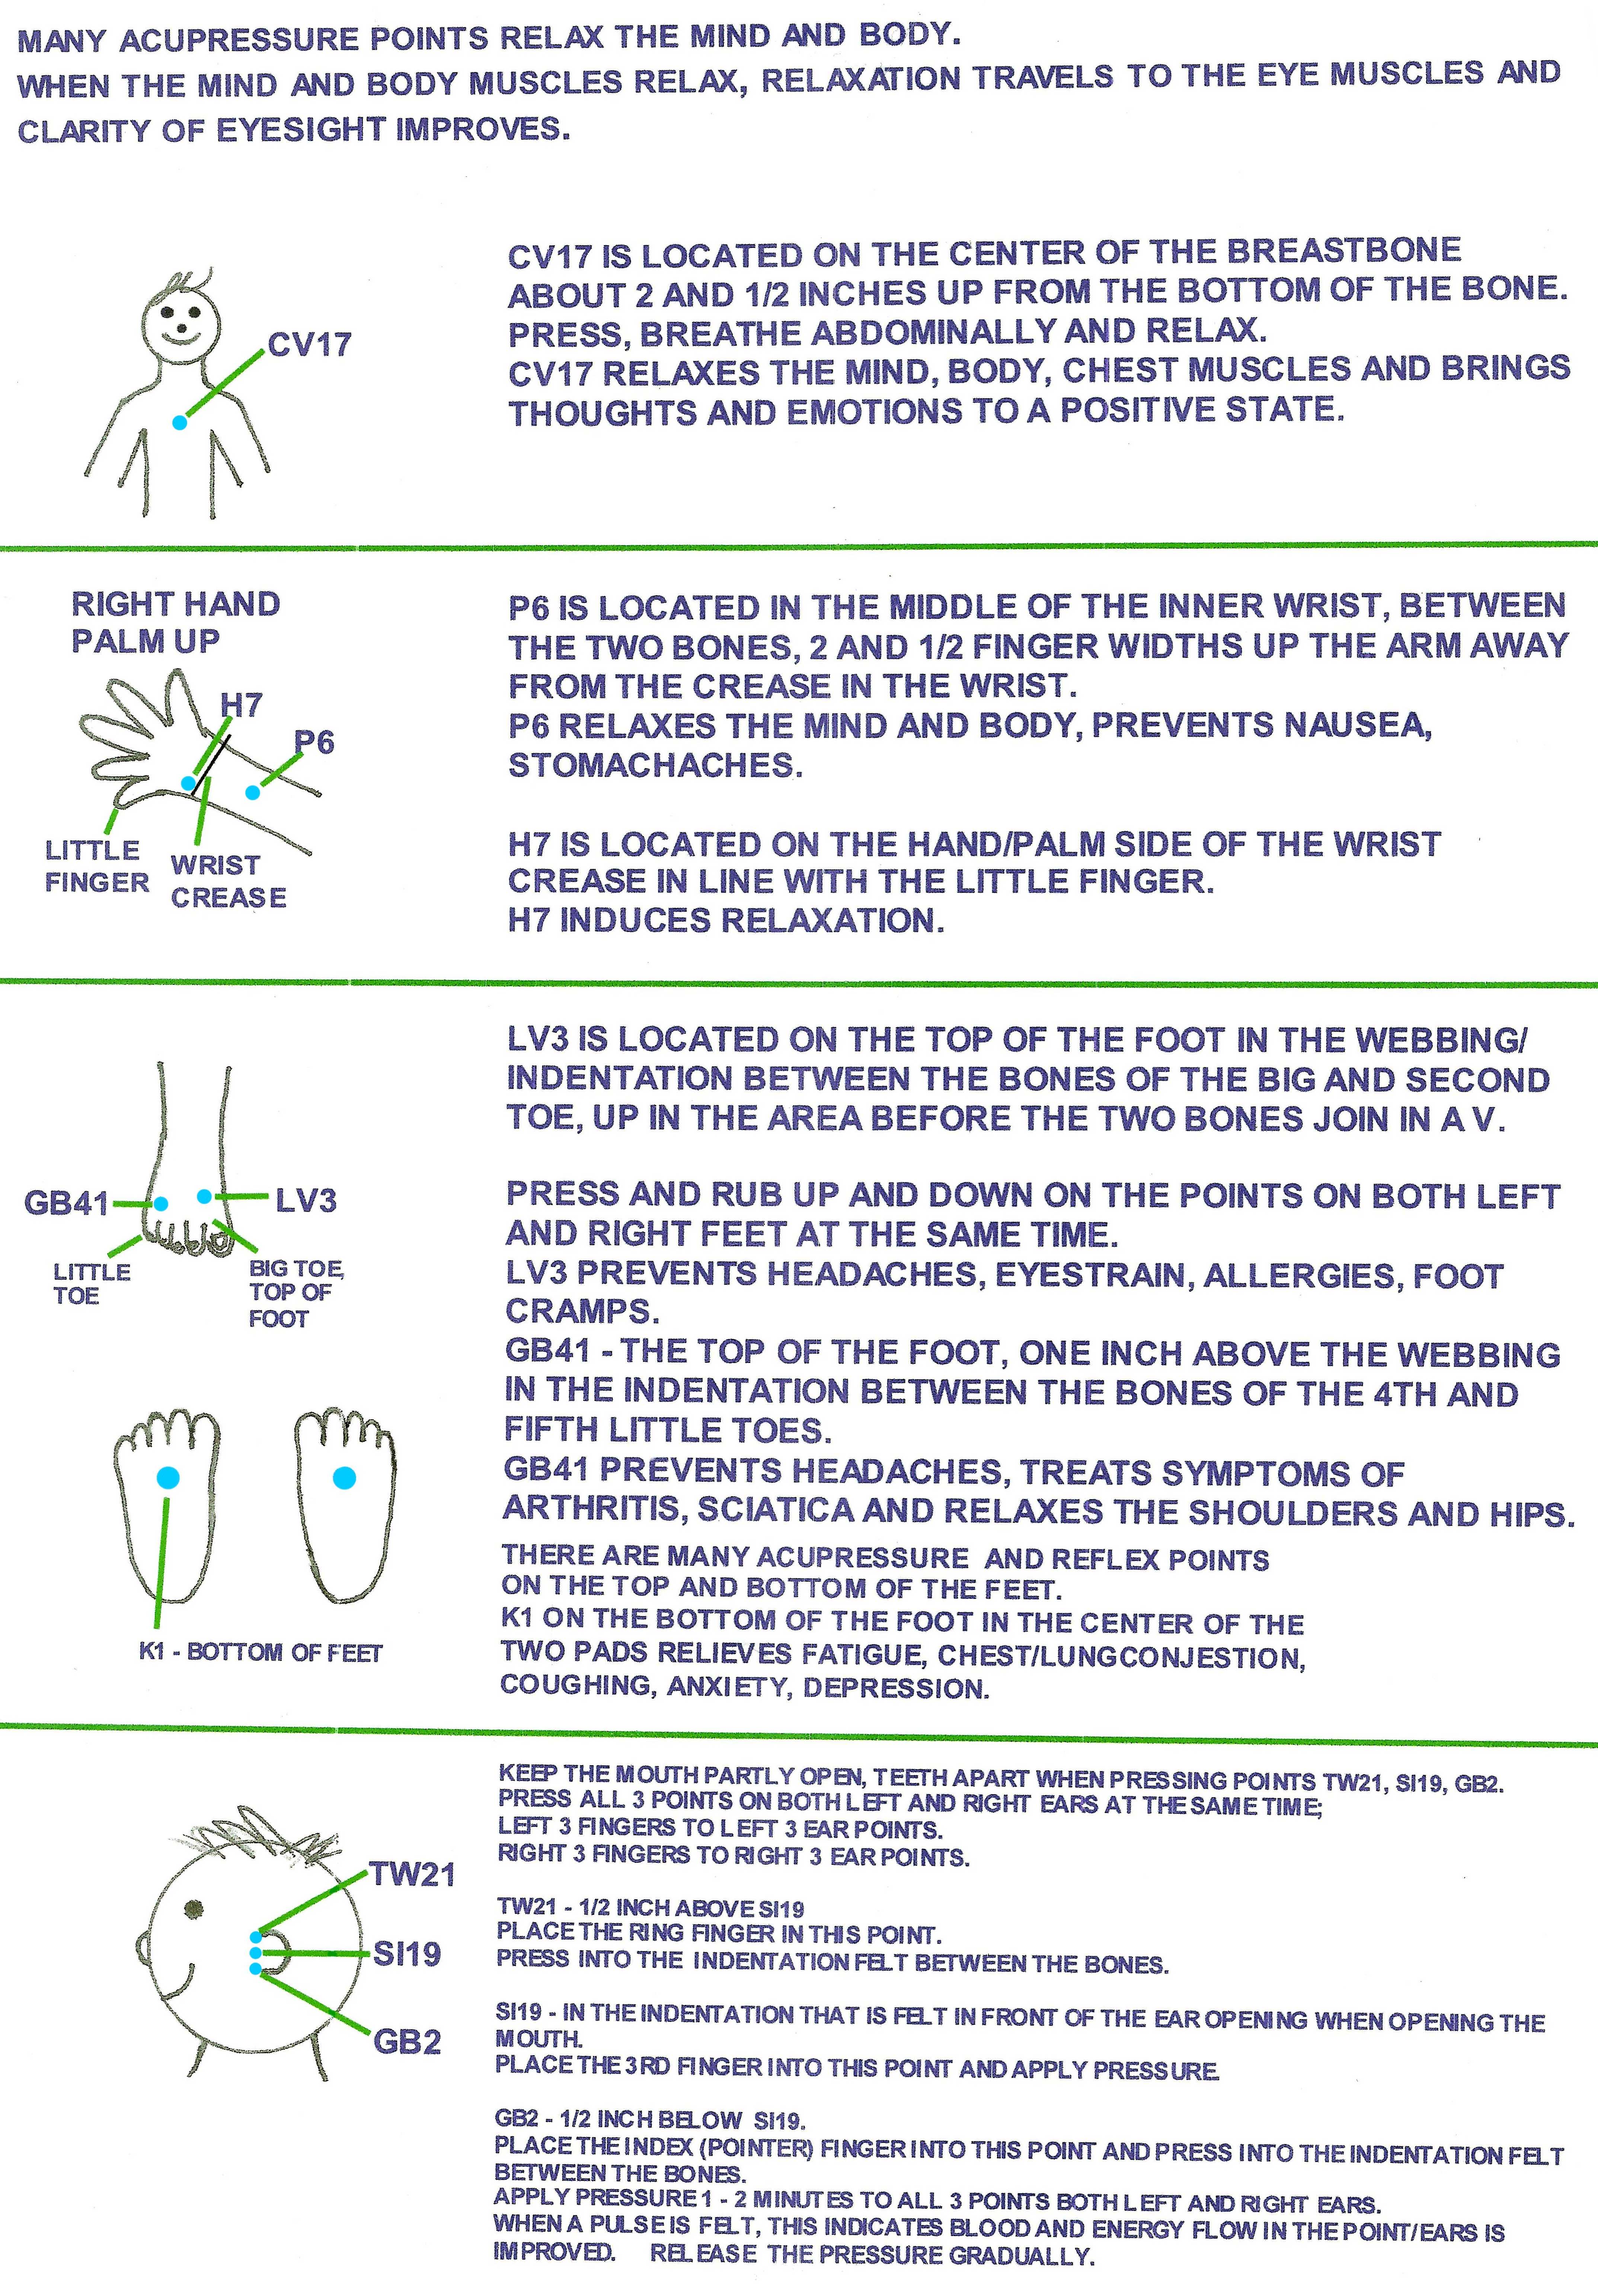 How can you get a free chart of acupressure points for the hands and feet?